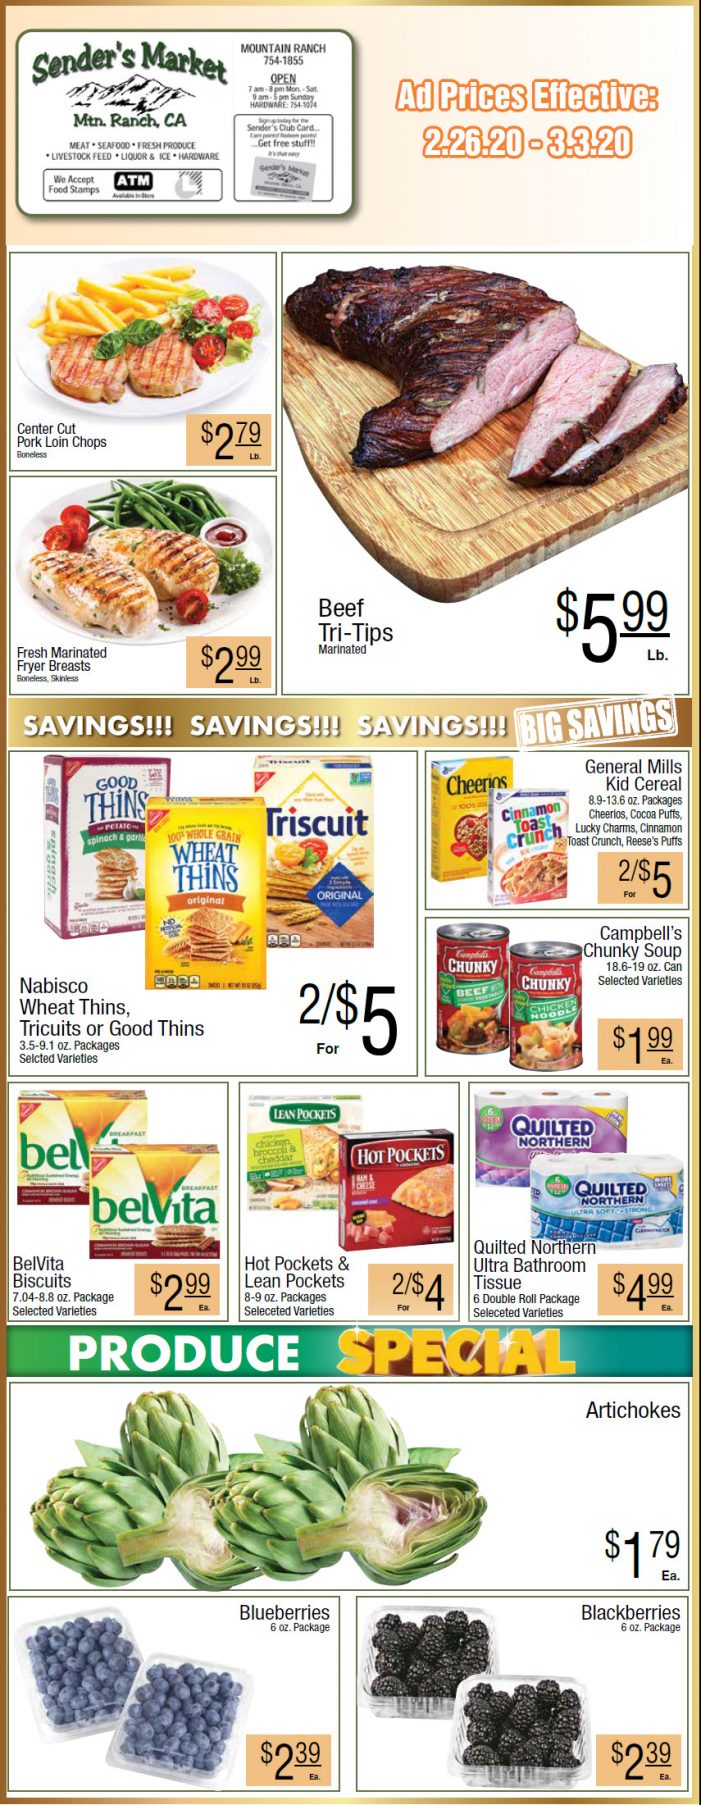 Sender’s Market’s Weekly Ad & Grocery Specials Through March 3rd